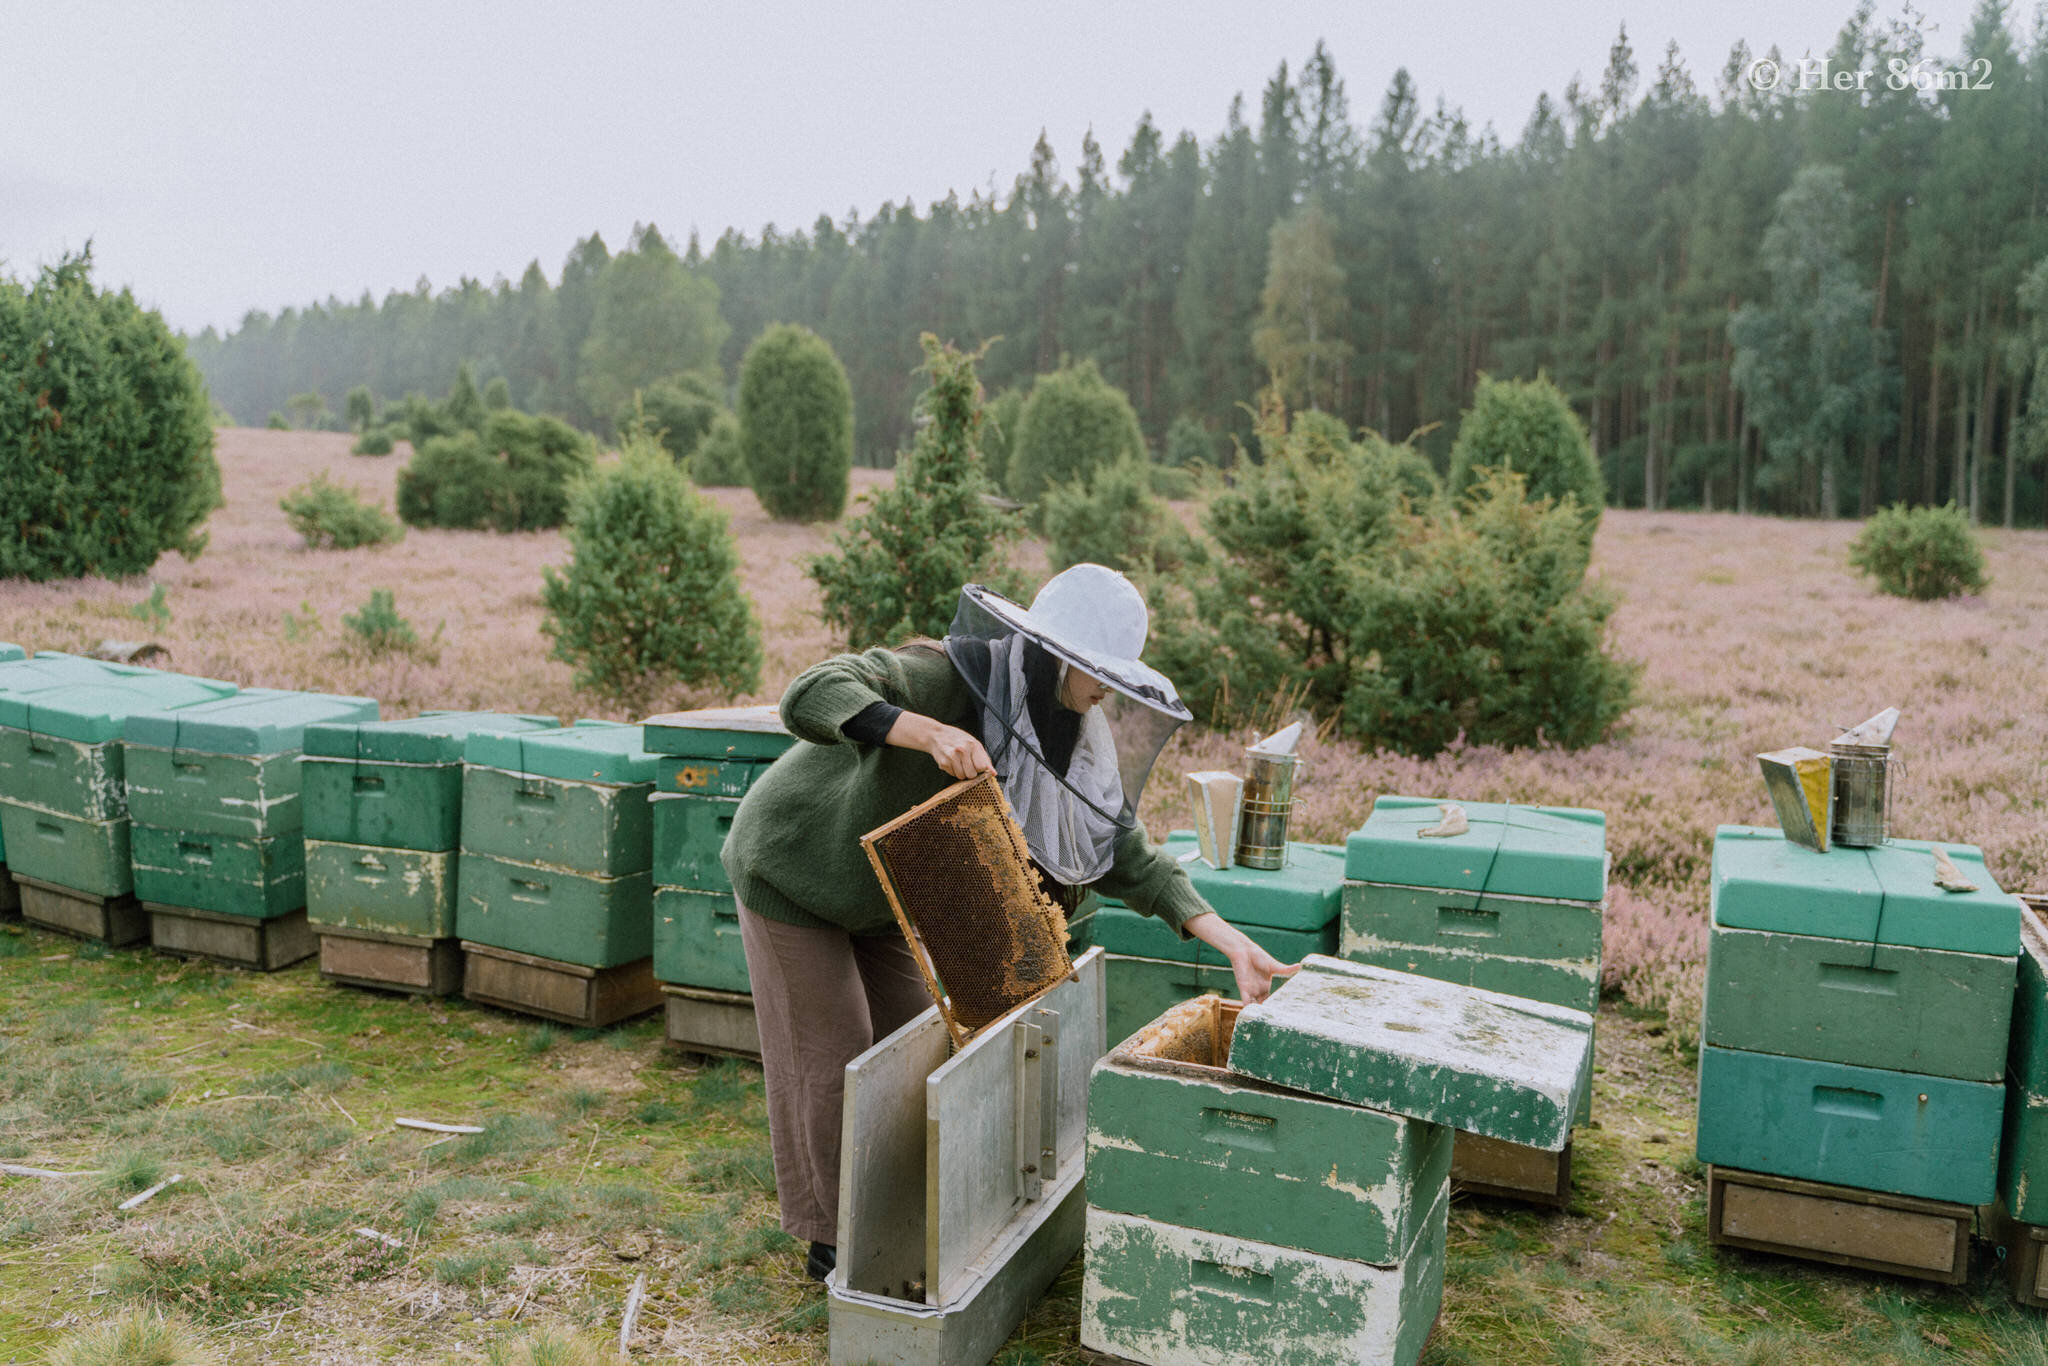 One Day Learning the Art of Beekeeping and Making Honey - Her86m2 117.jpg